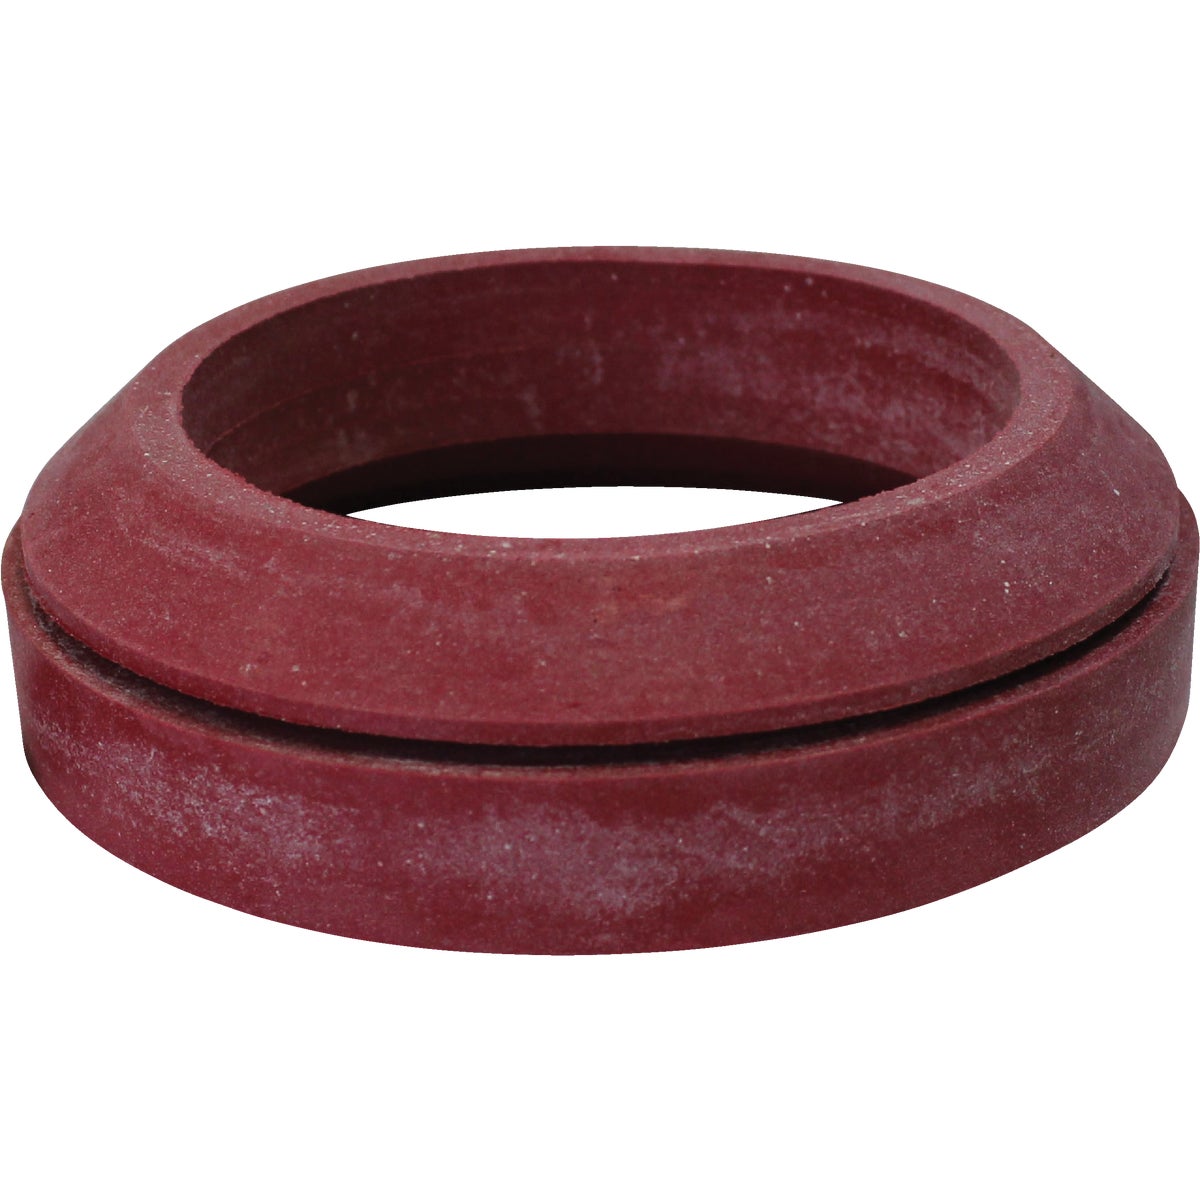 Item 400470, The Large 3" Tank to Bowl Gasket is designed to fit specific toilet models 